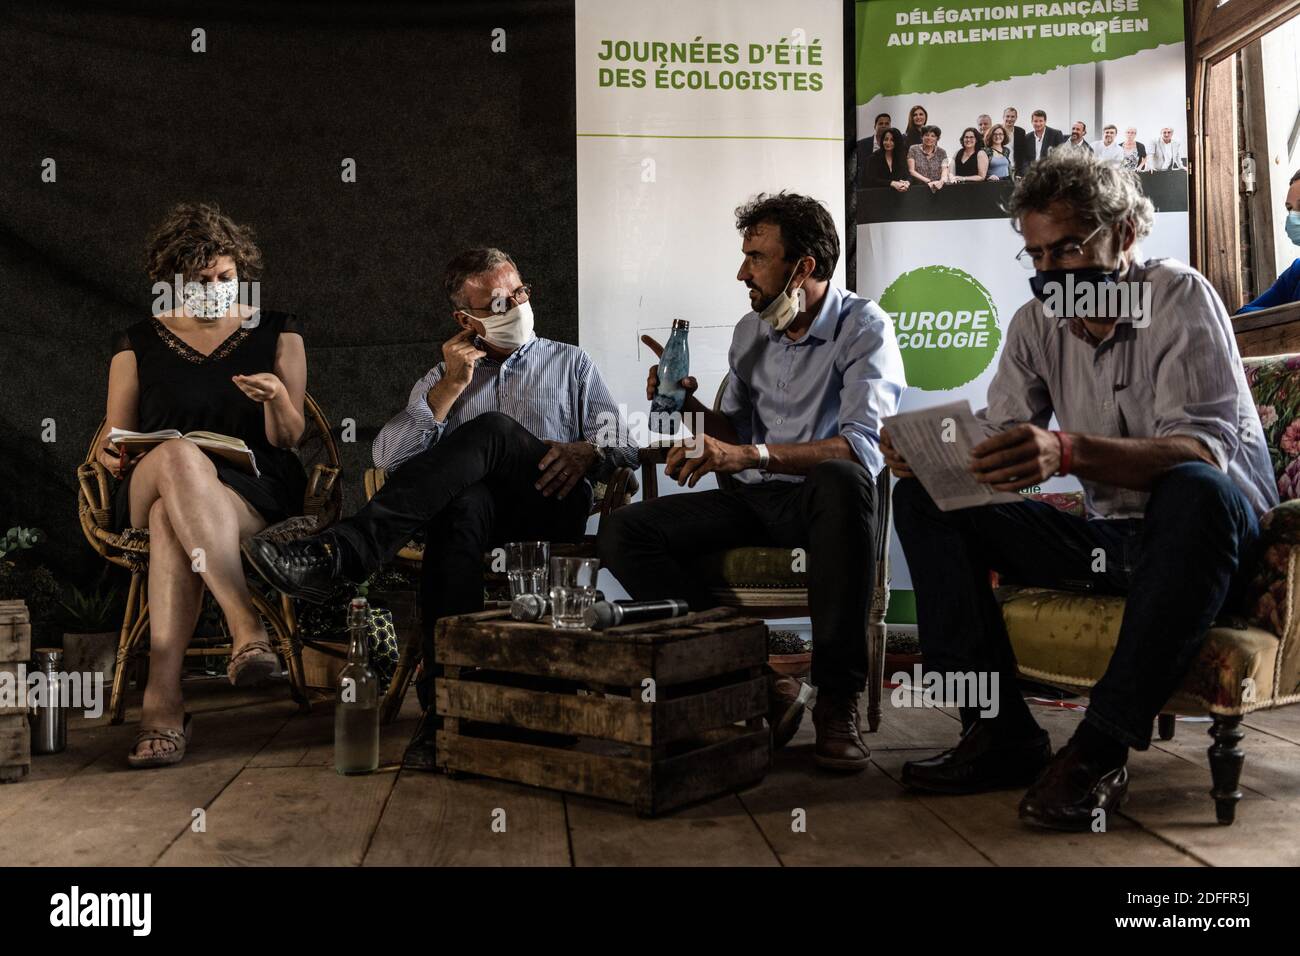 From left to rigth, Jeanne Barseghian, Mayor of Strasbourg, Pierre Hurmic, Mayor of Bordeaux, Gregory Doucet, Mayor of Lyon, and Didier Jau, Mayor of the 4th and 5th district of Marseille attending Europe Ecologie Les Verts (EELV) ecologist party's summer university in Pantin, France, on August 21, 2020. Photo by Daniel Derajinski/ABACAPRESS.COM Stock Photo